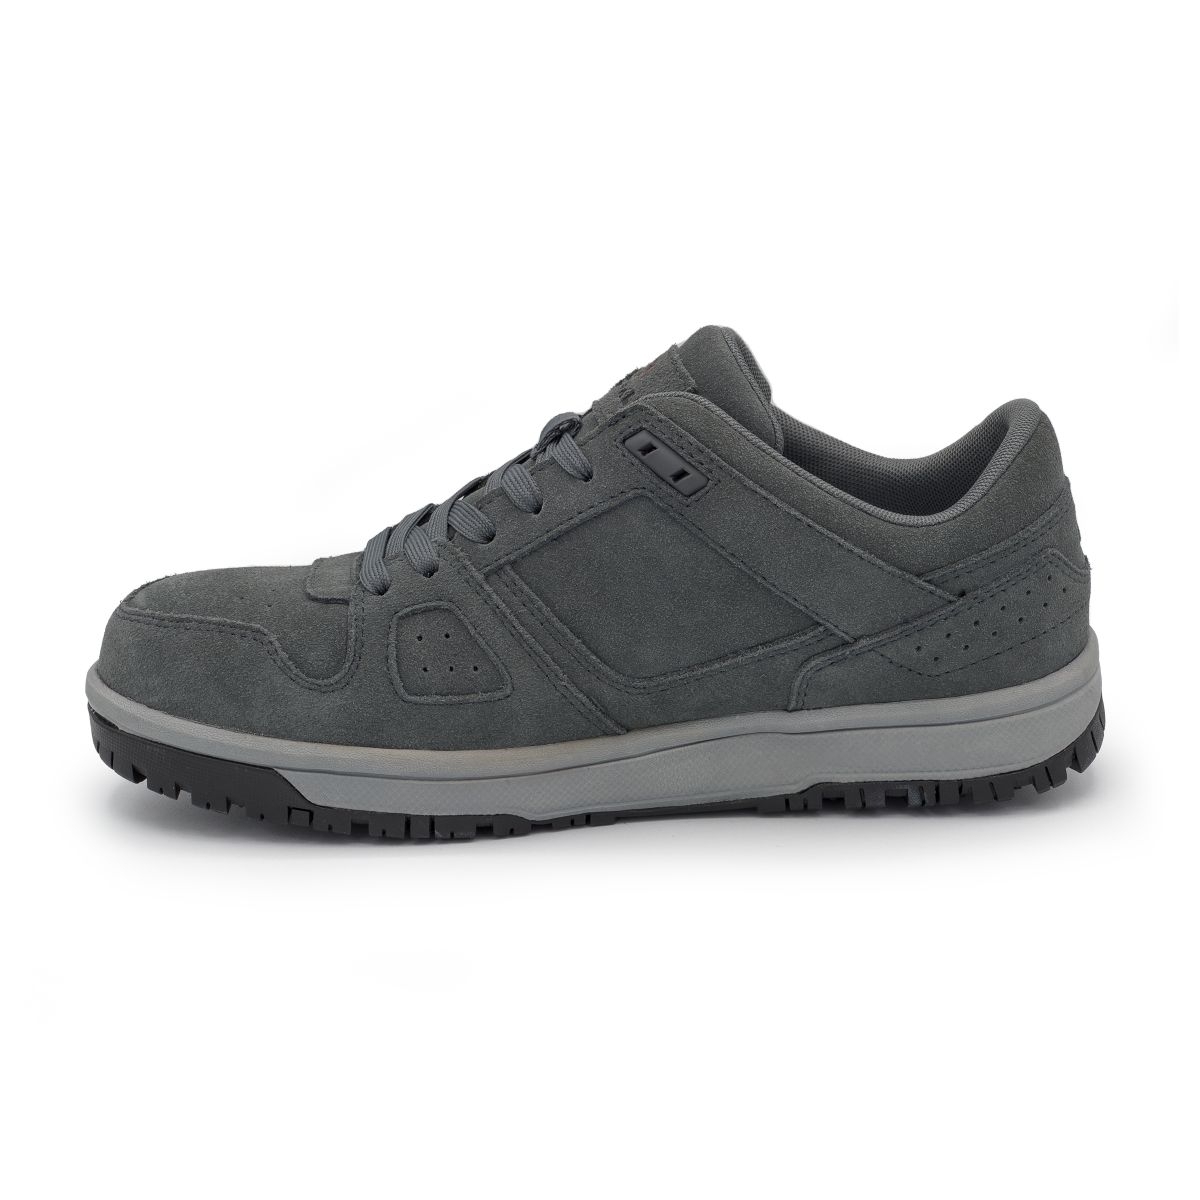 AIRWALK SAFETY Men's Mongo Composite Toe EH Work Shoe Charcoal/Grey - AW6301 CHARCOAL/GRAY - CHARCOAL/GRAY, 12-W